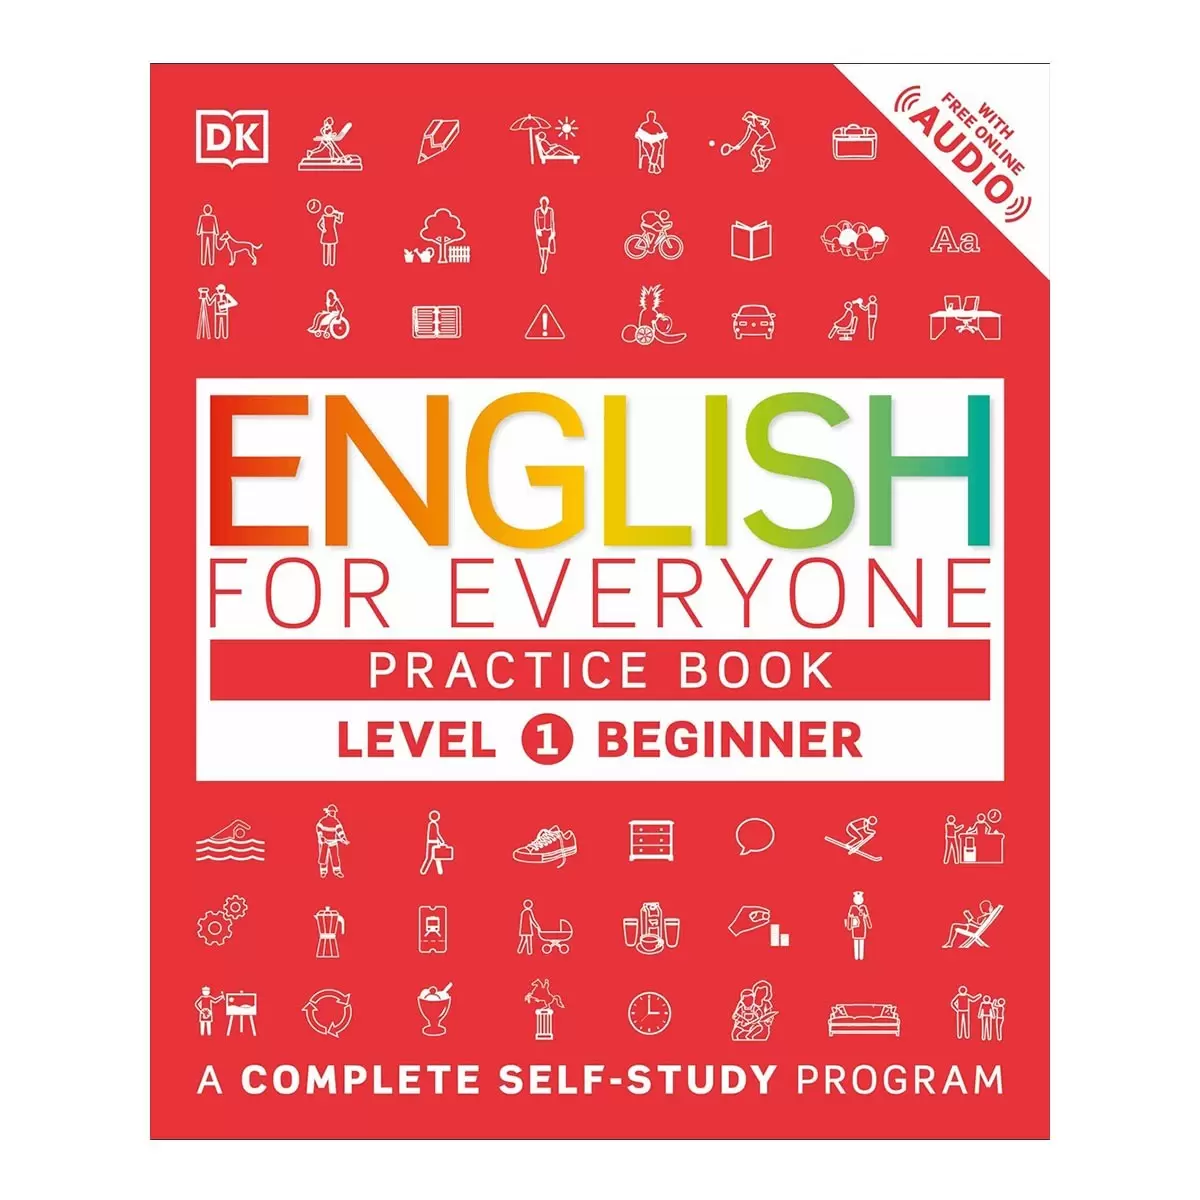 English For Everyone Level 1 Beginner Practice Book 外文書